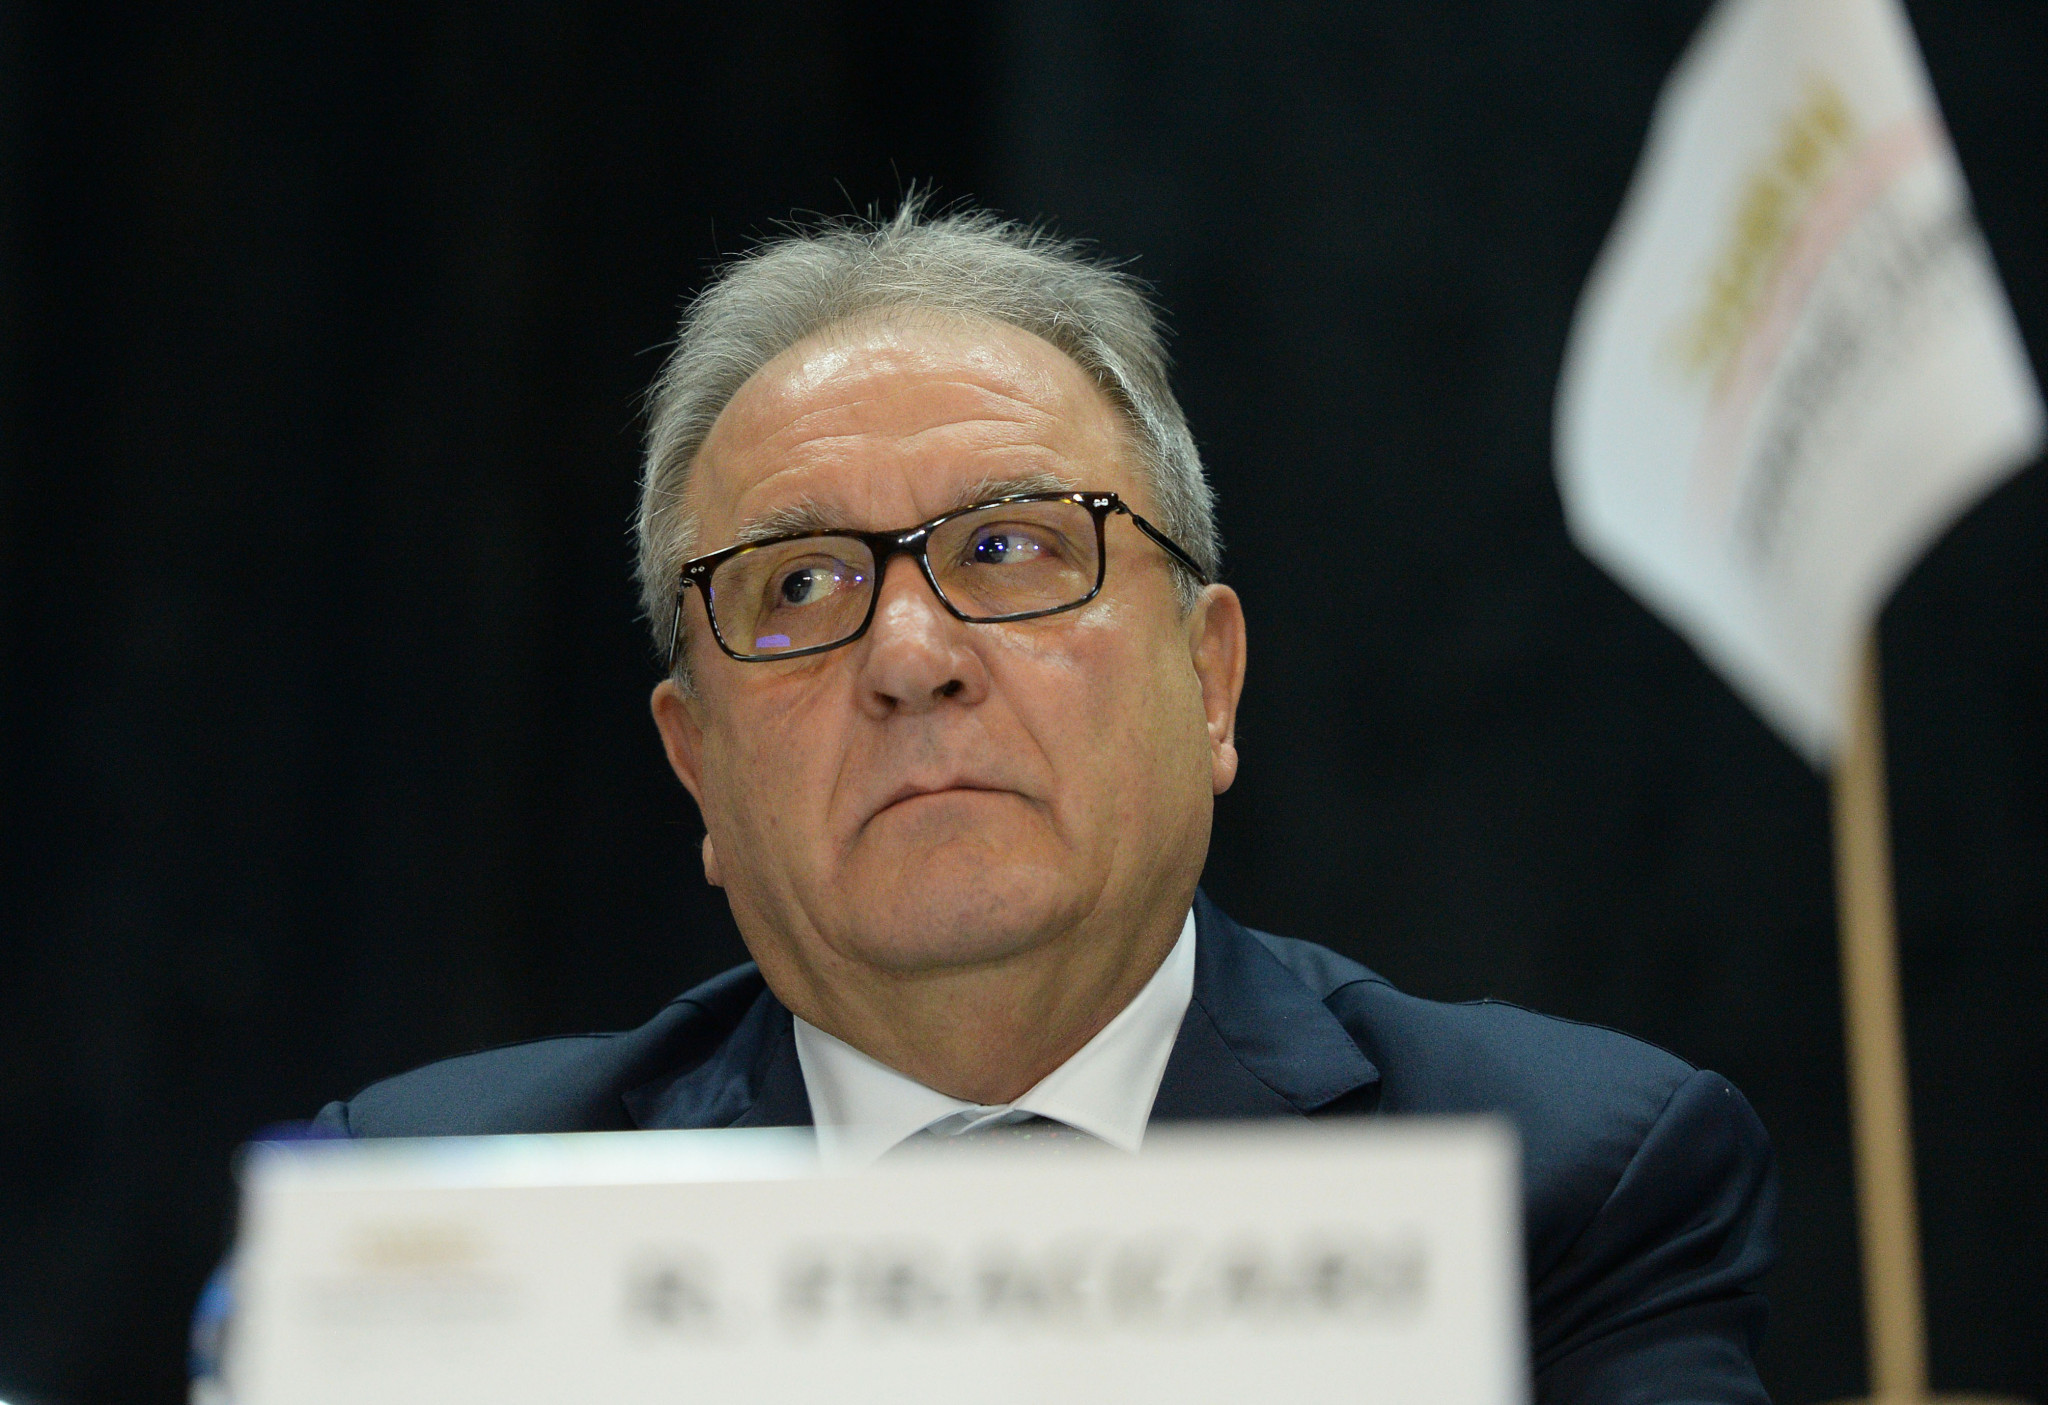 Riccardo Fraccari has been WBSC President since May 2014 ©Getty Images